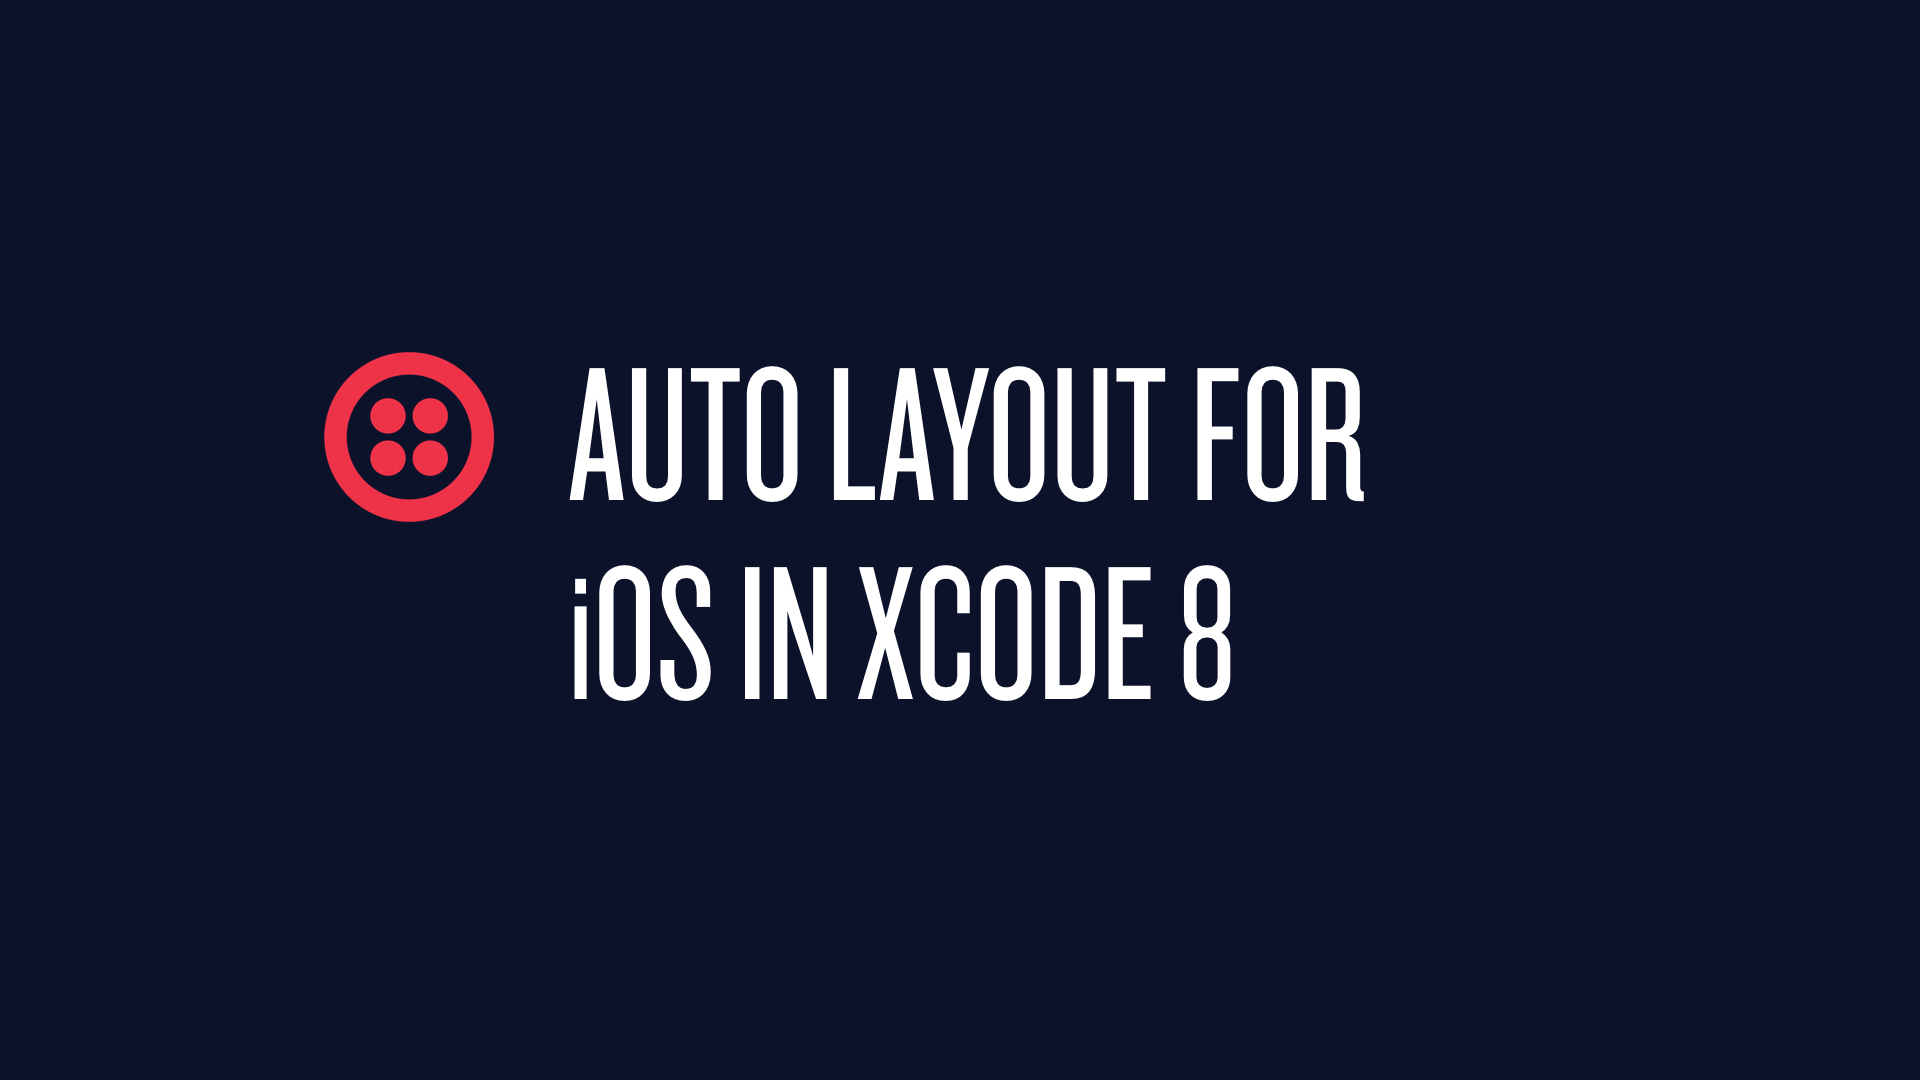 Auto Layout for iOS in Xcode 8